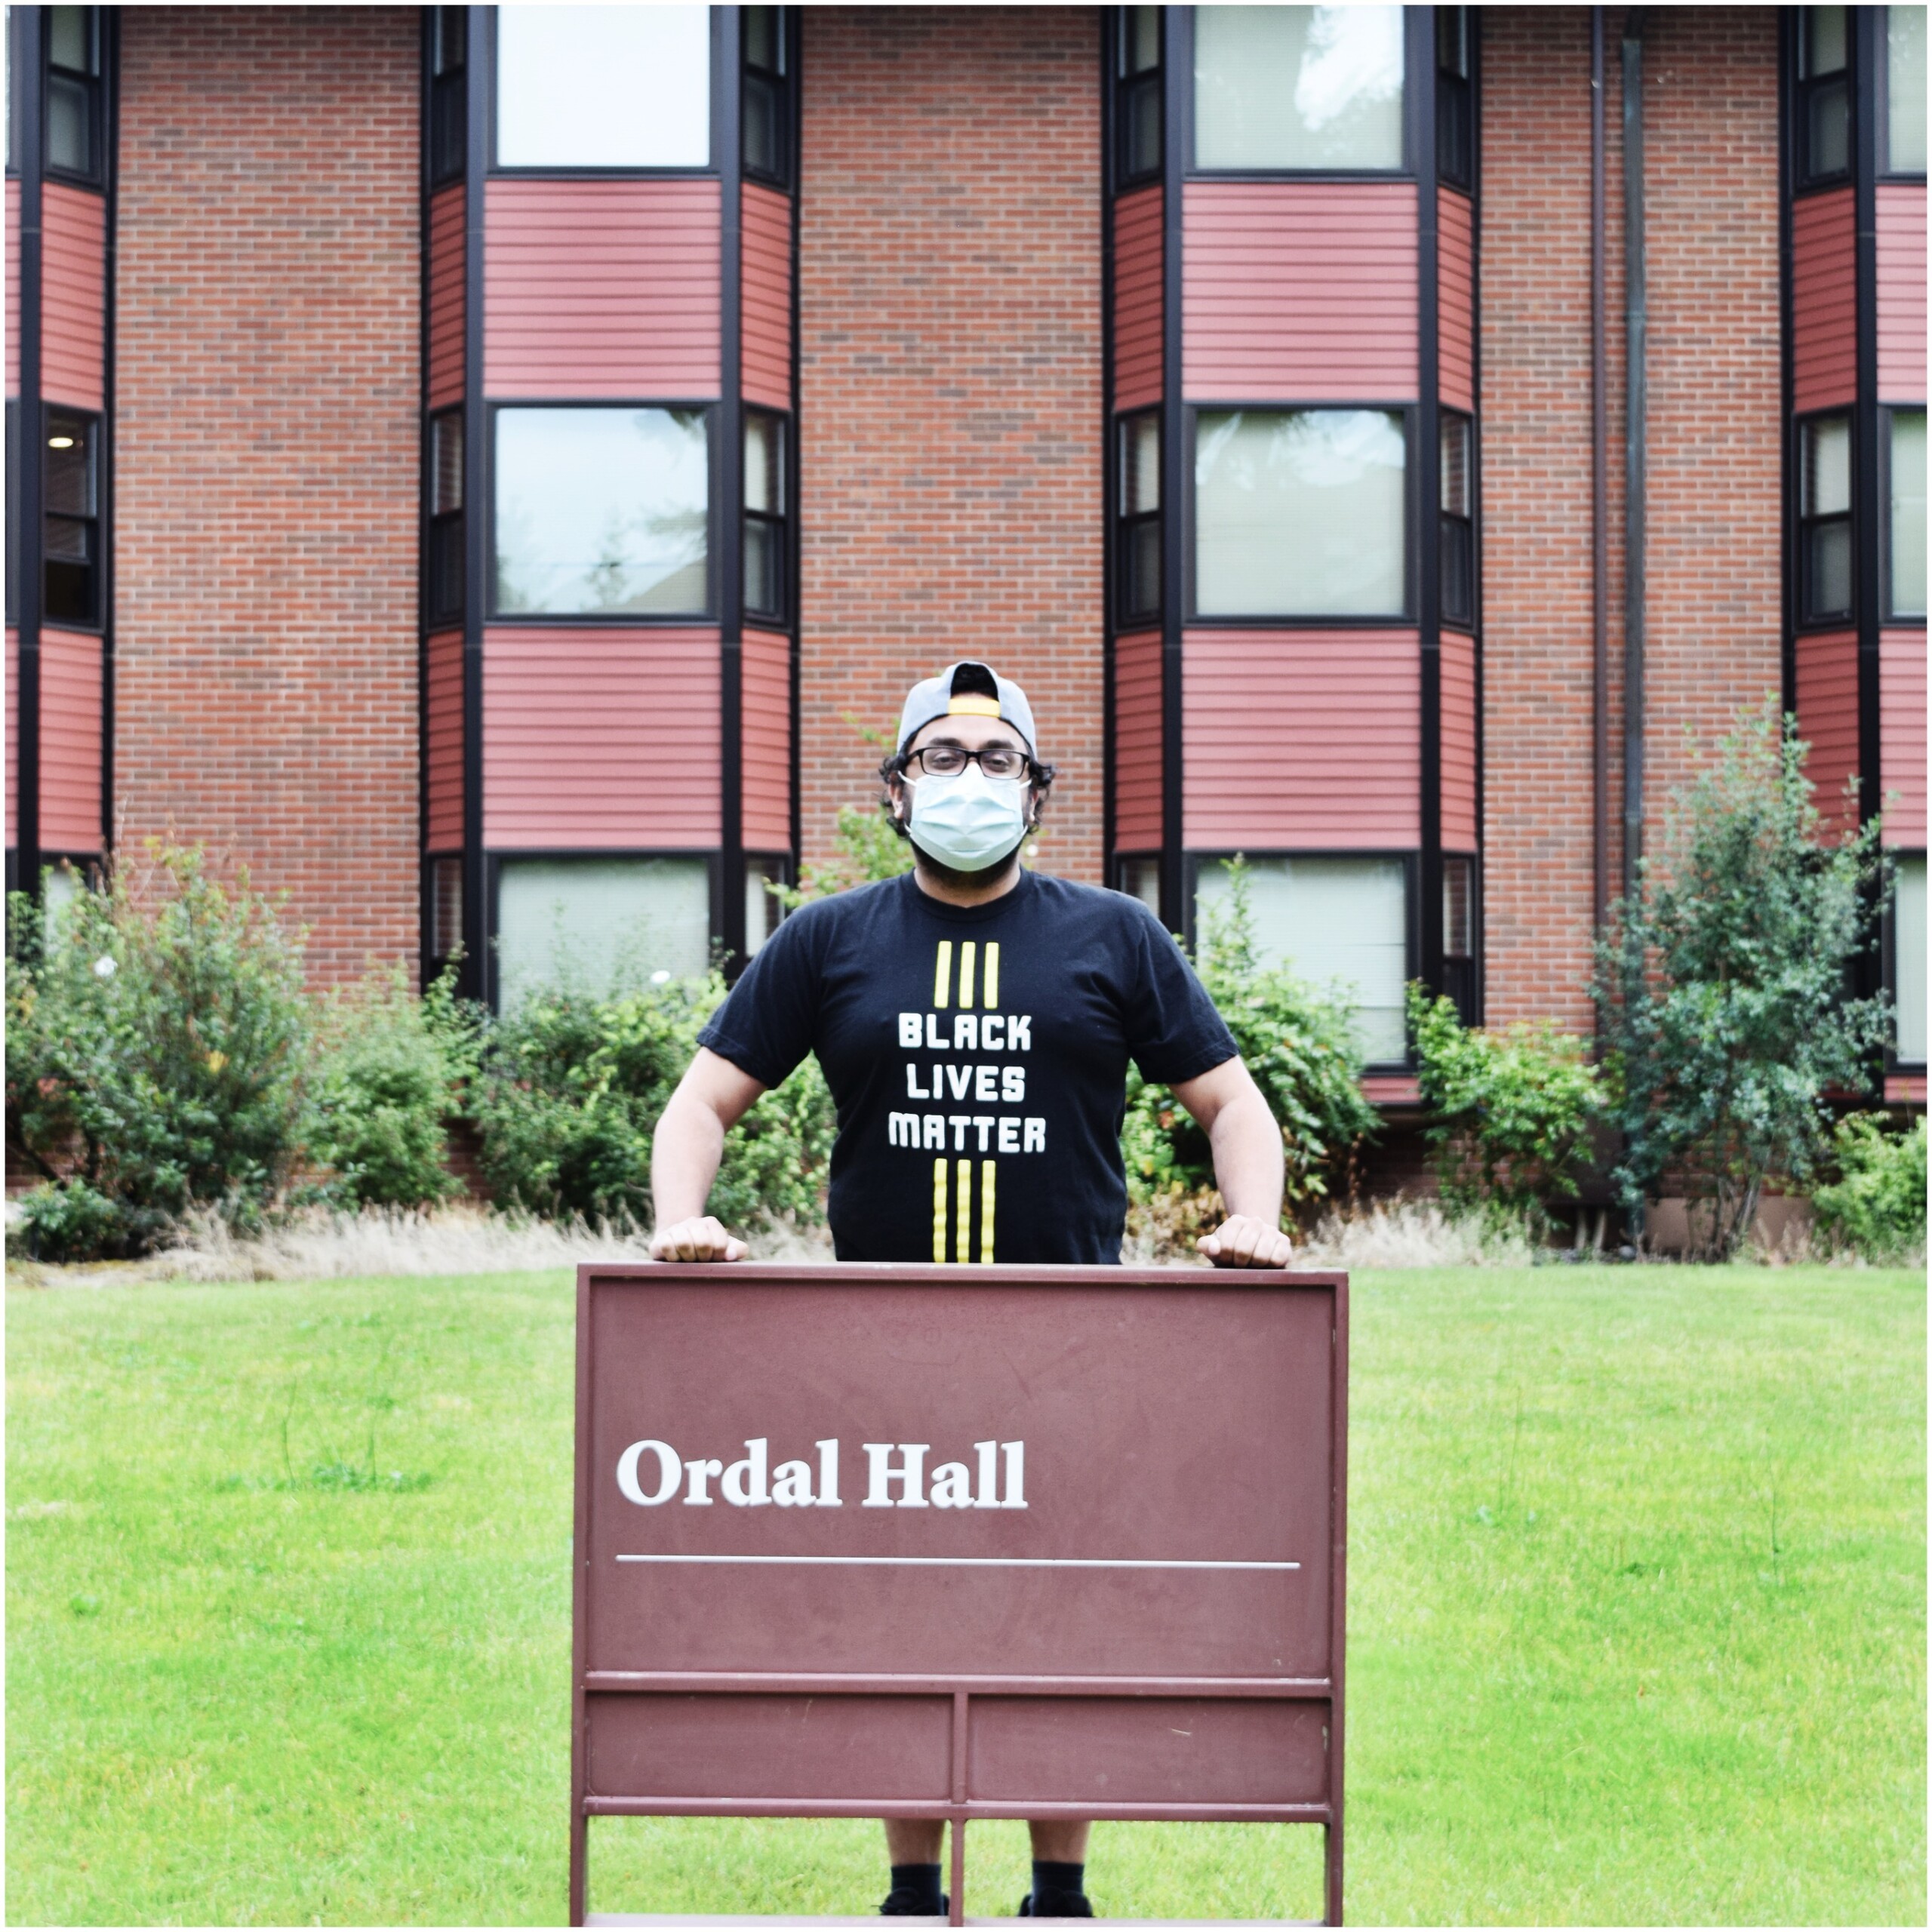 Dhaval Patel in front of Ordal Hall